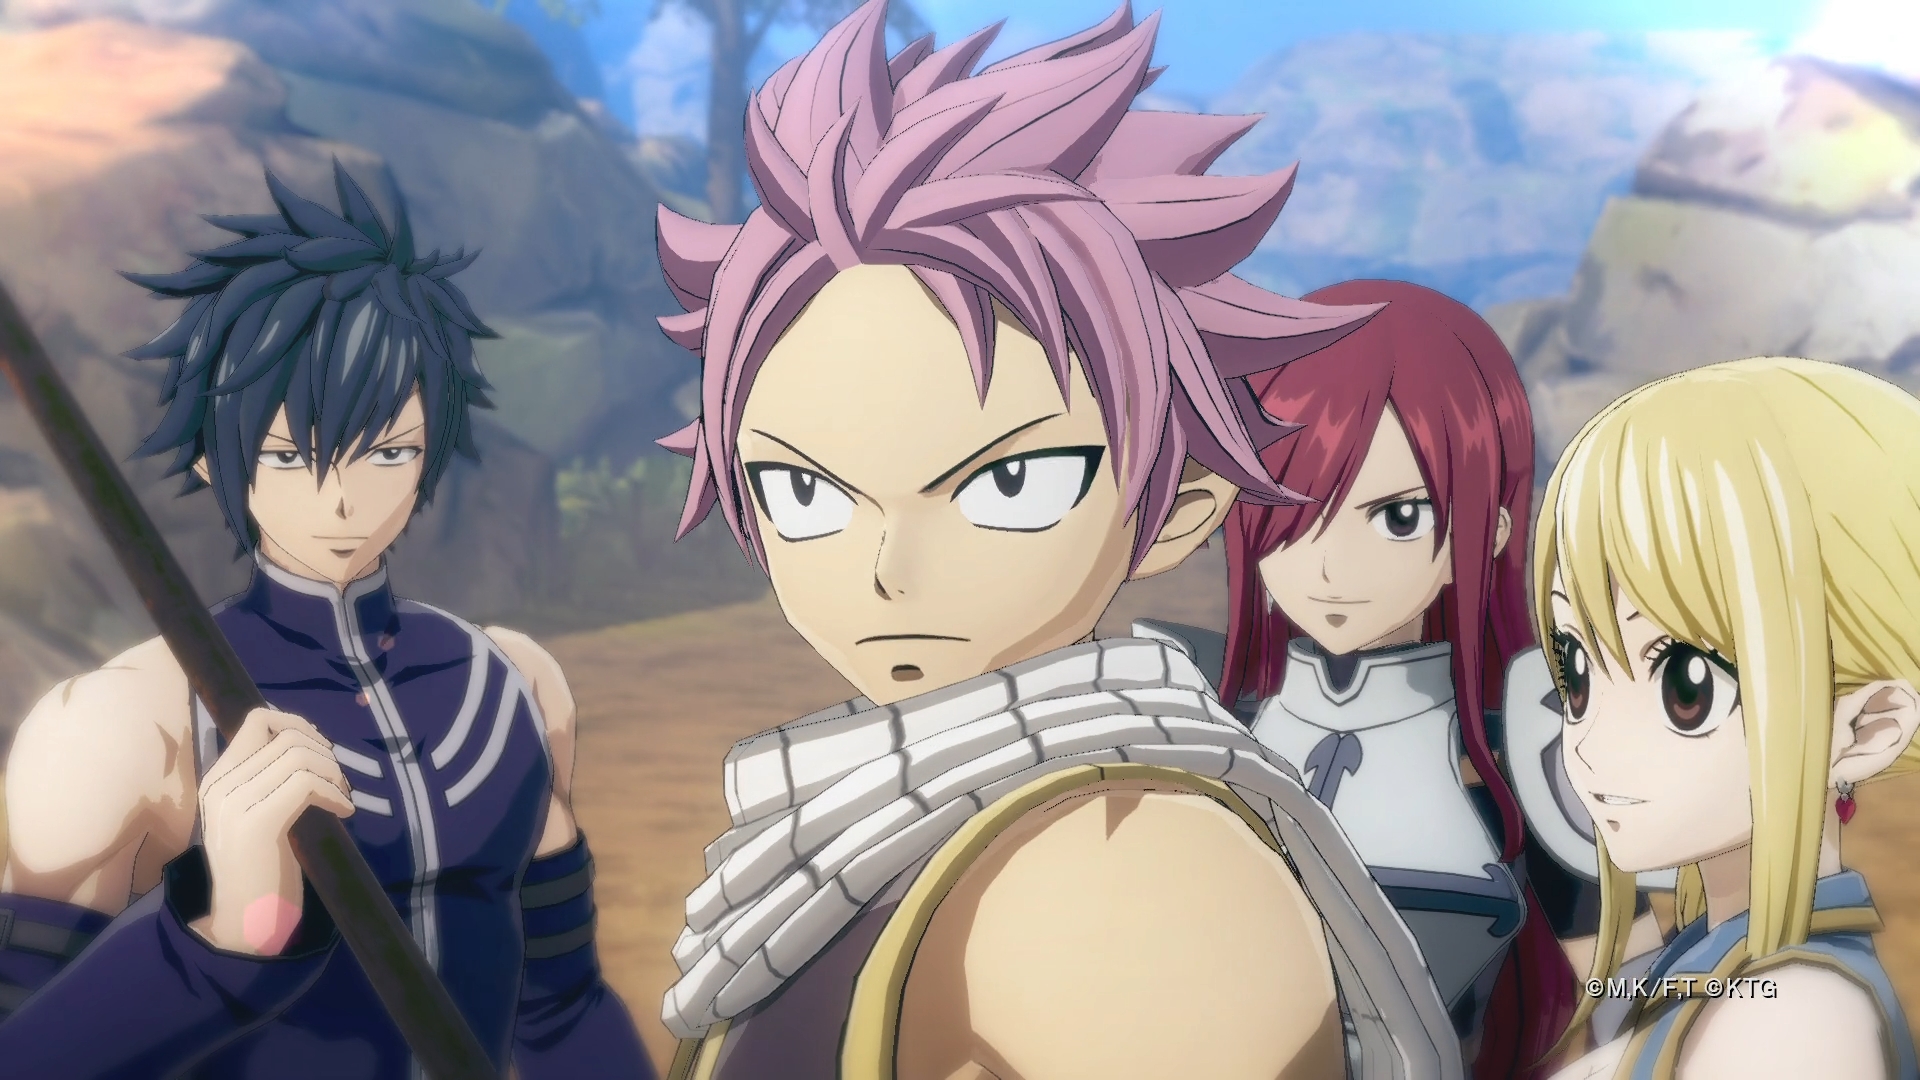 fairy tail for switch